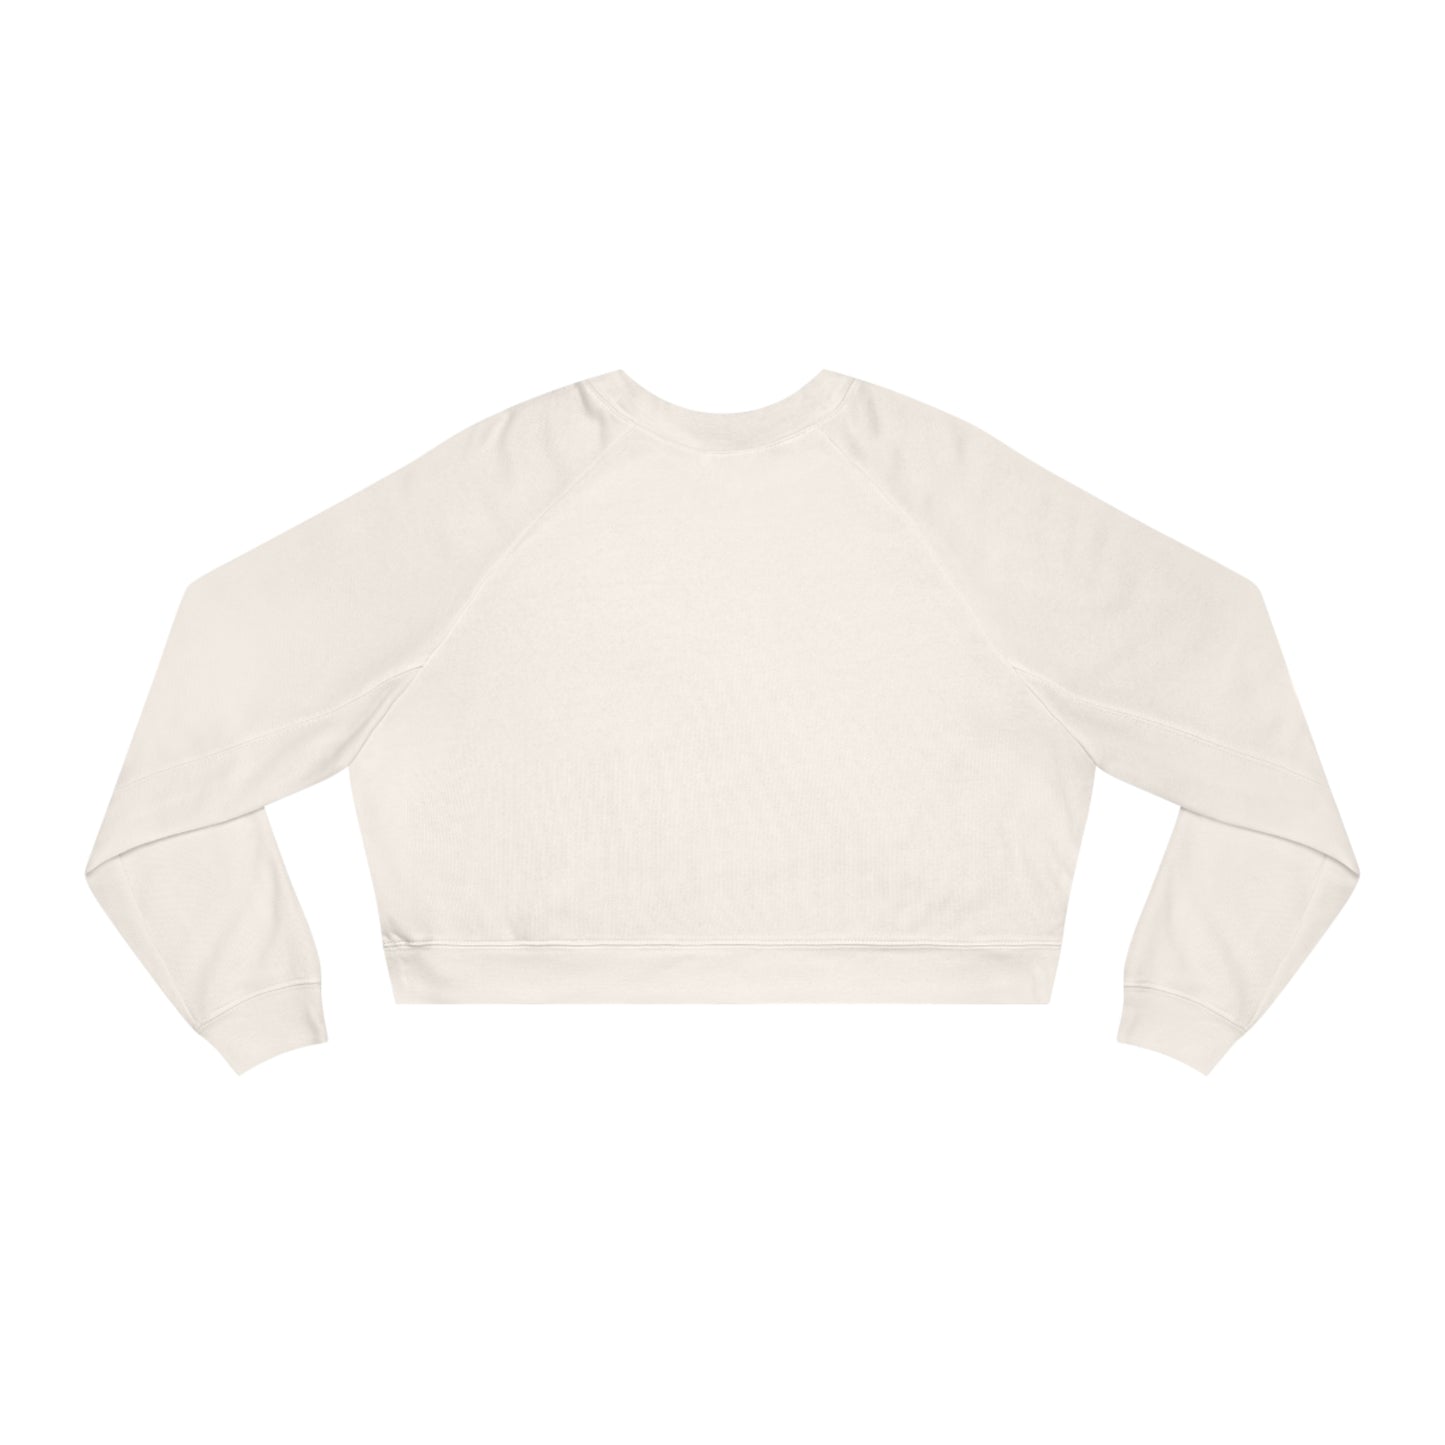 Great Throw - Women's Cropped Fleece Pullover - Fry1Productions